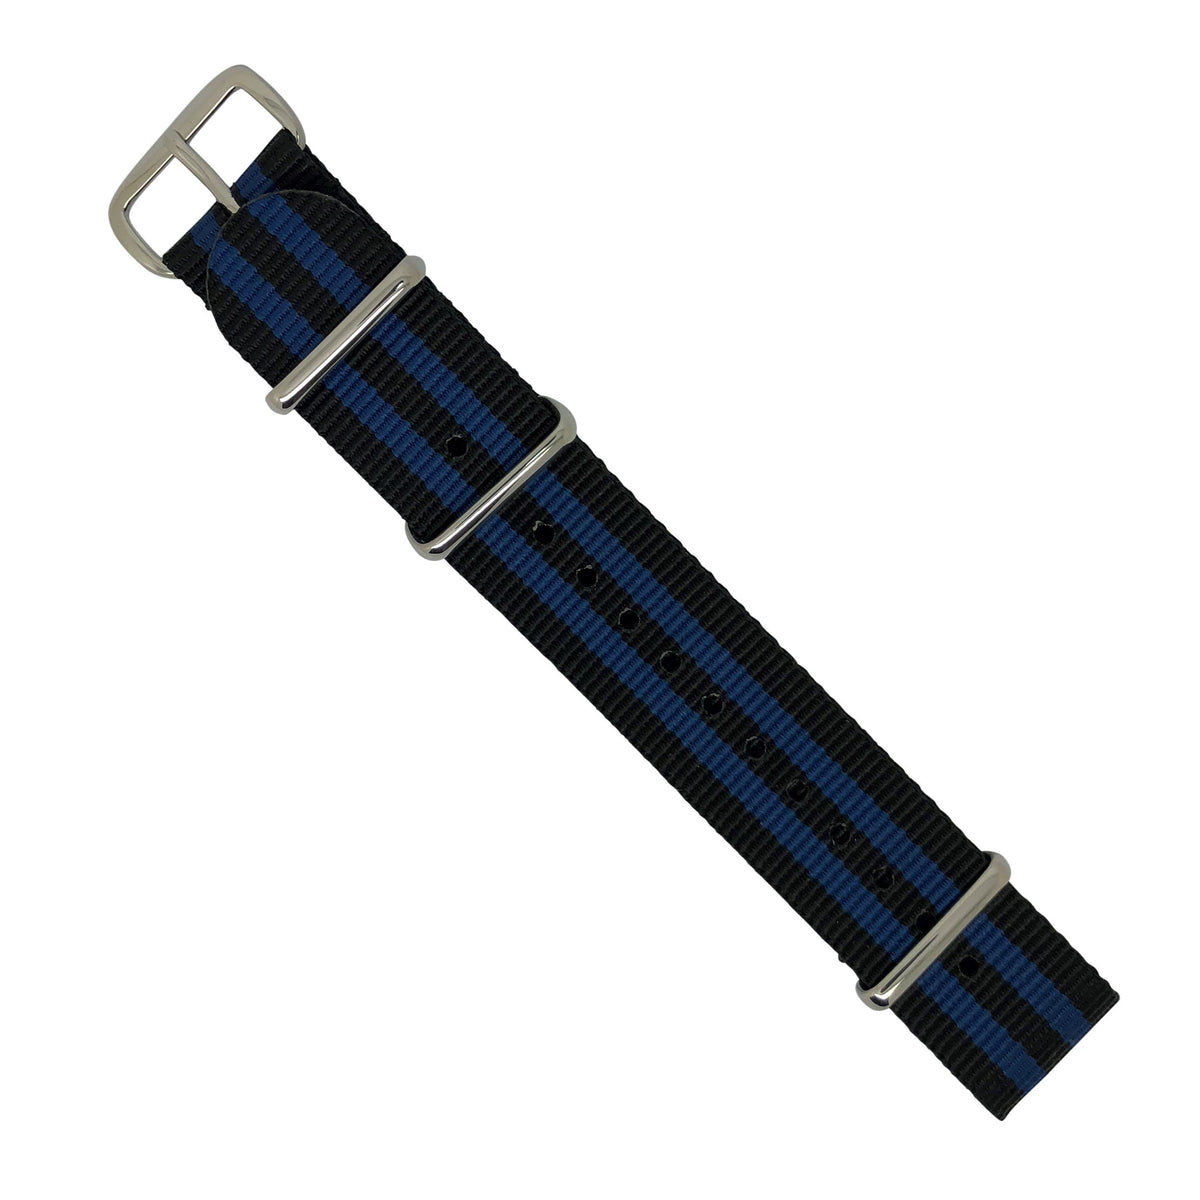 Premium Nato Strap in Black Blue Small Stripes with Polished Silver Buckle (20mm) - Nomad Watch Works Malaysia